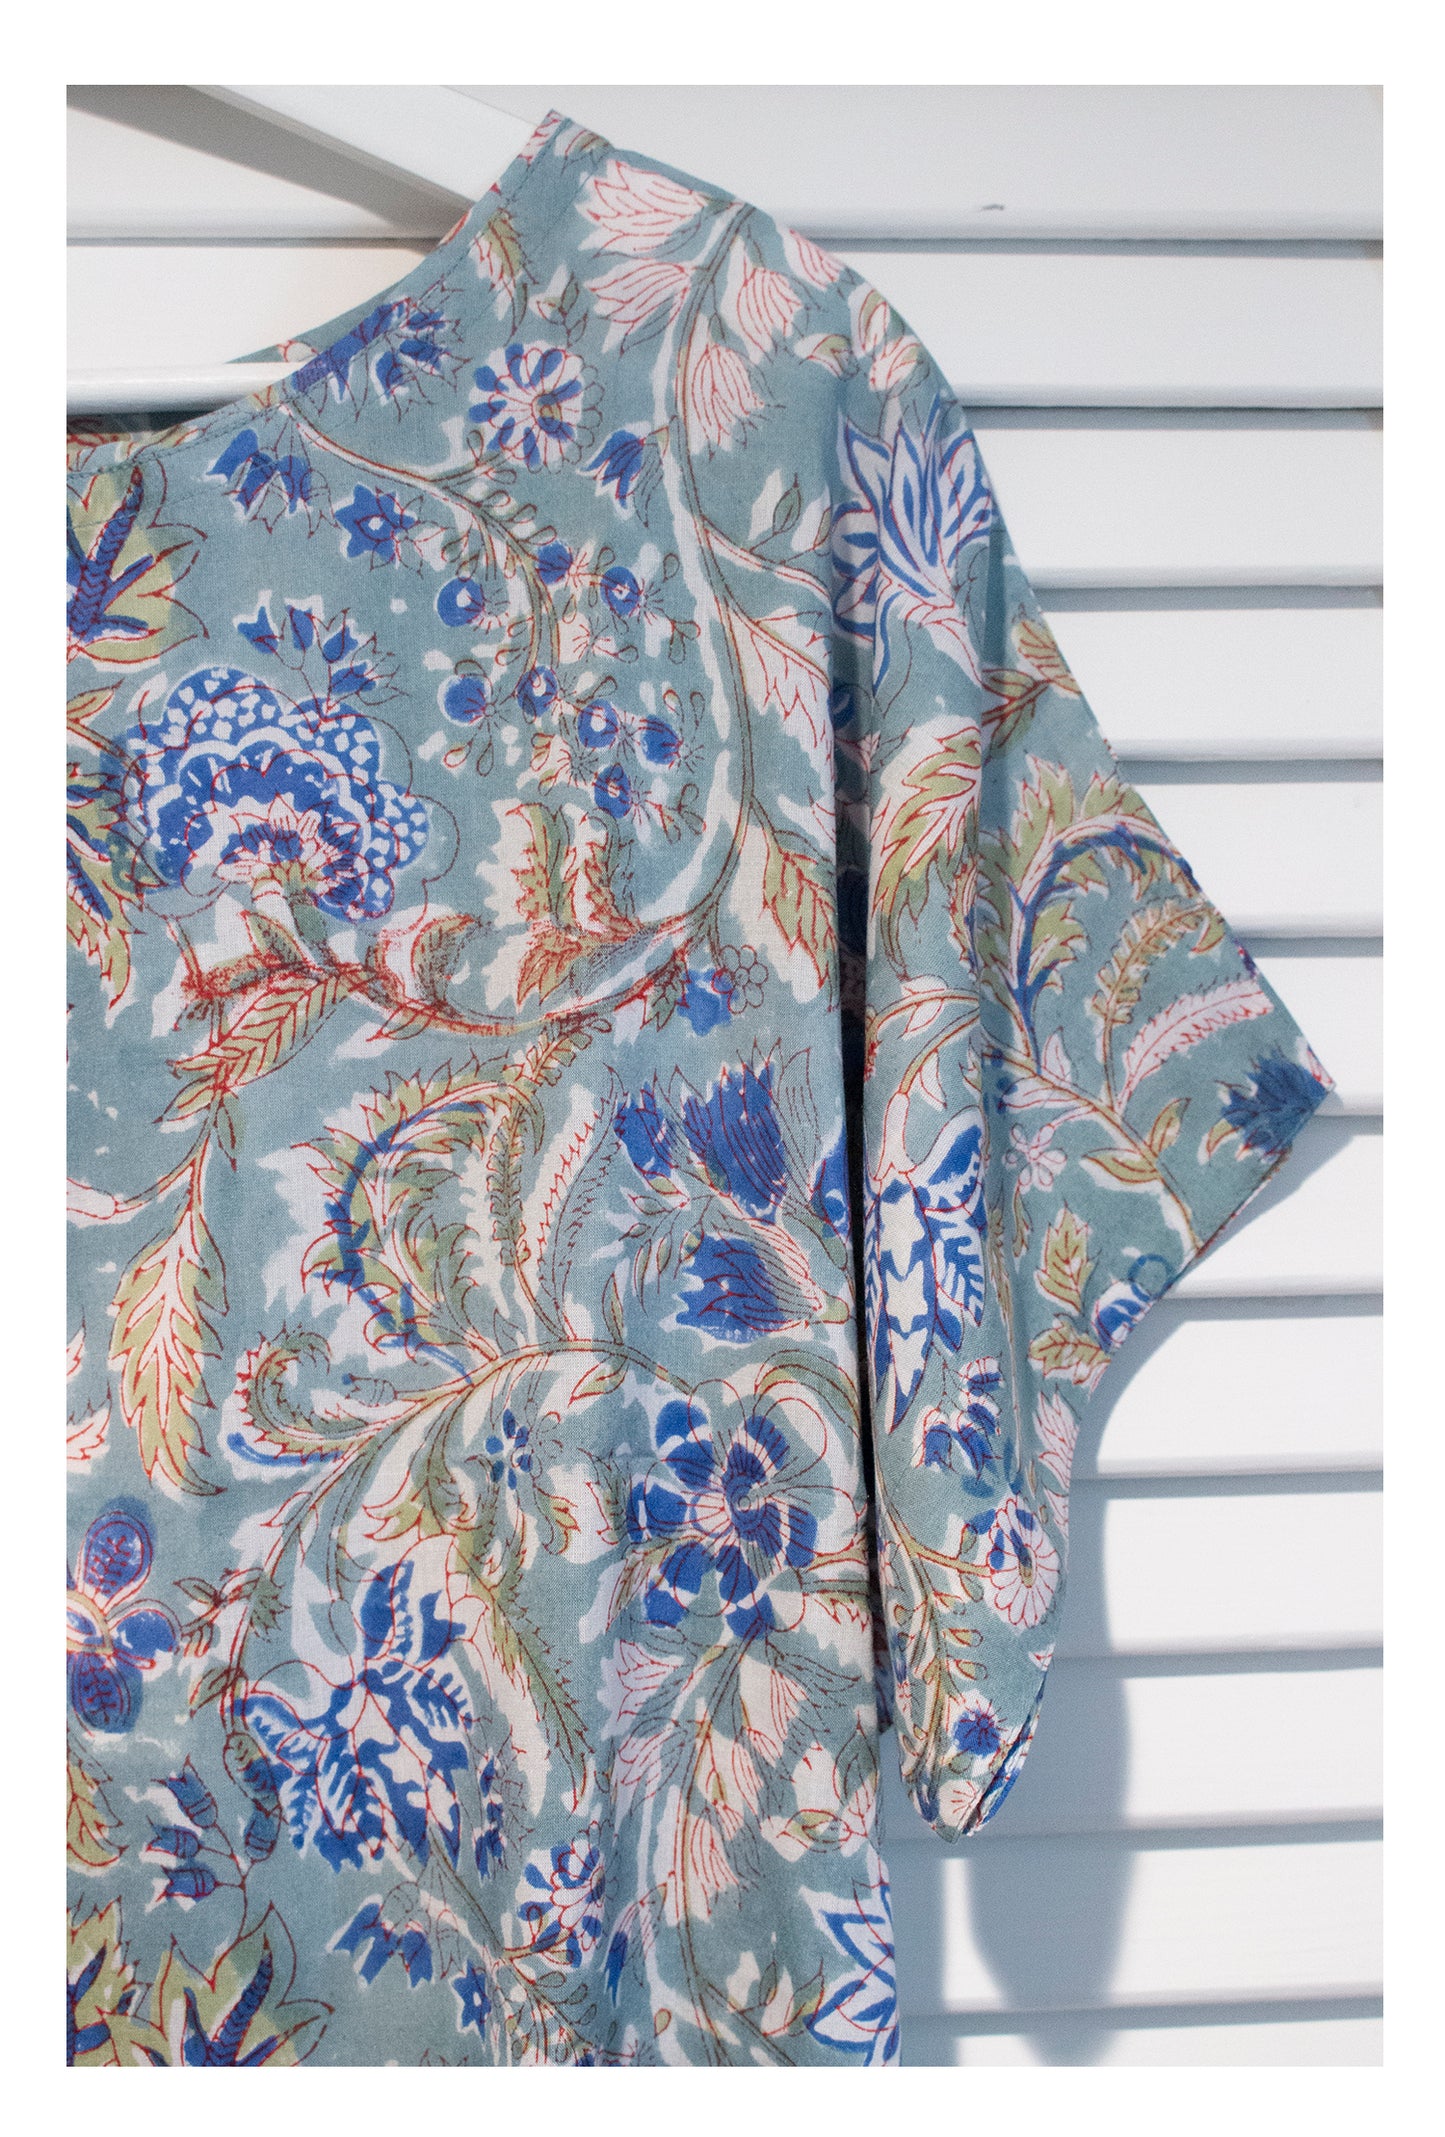 Maelu Designs box top in Pippa print. Detail view of neckline to sleeve opening